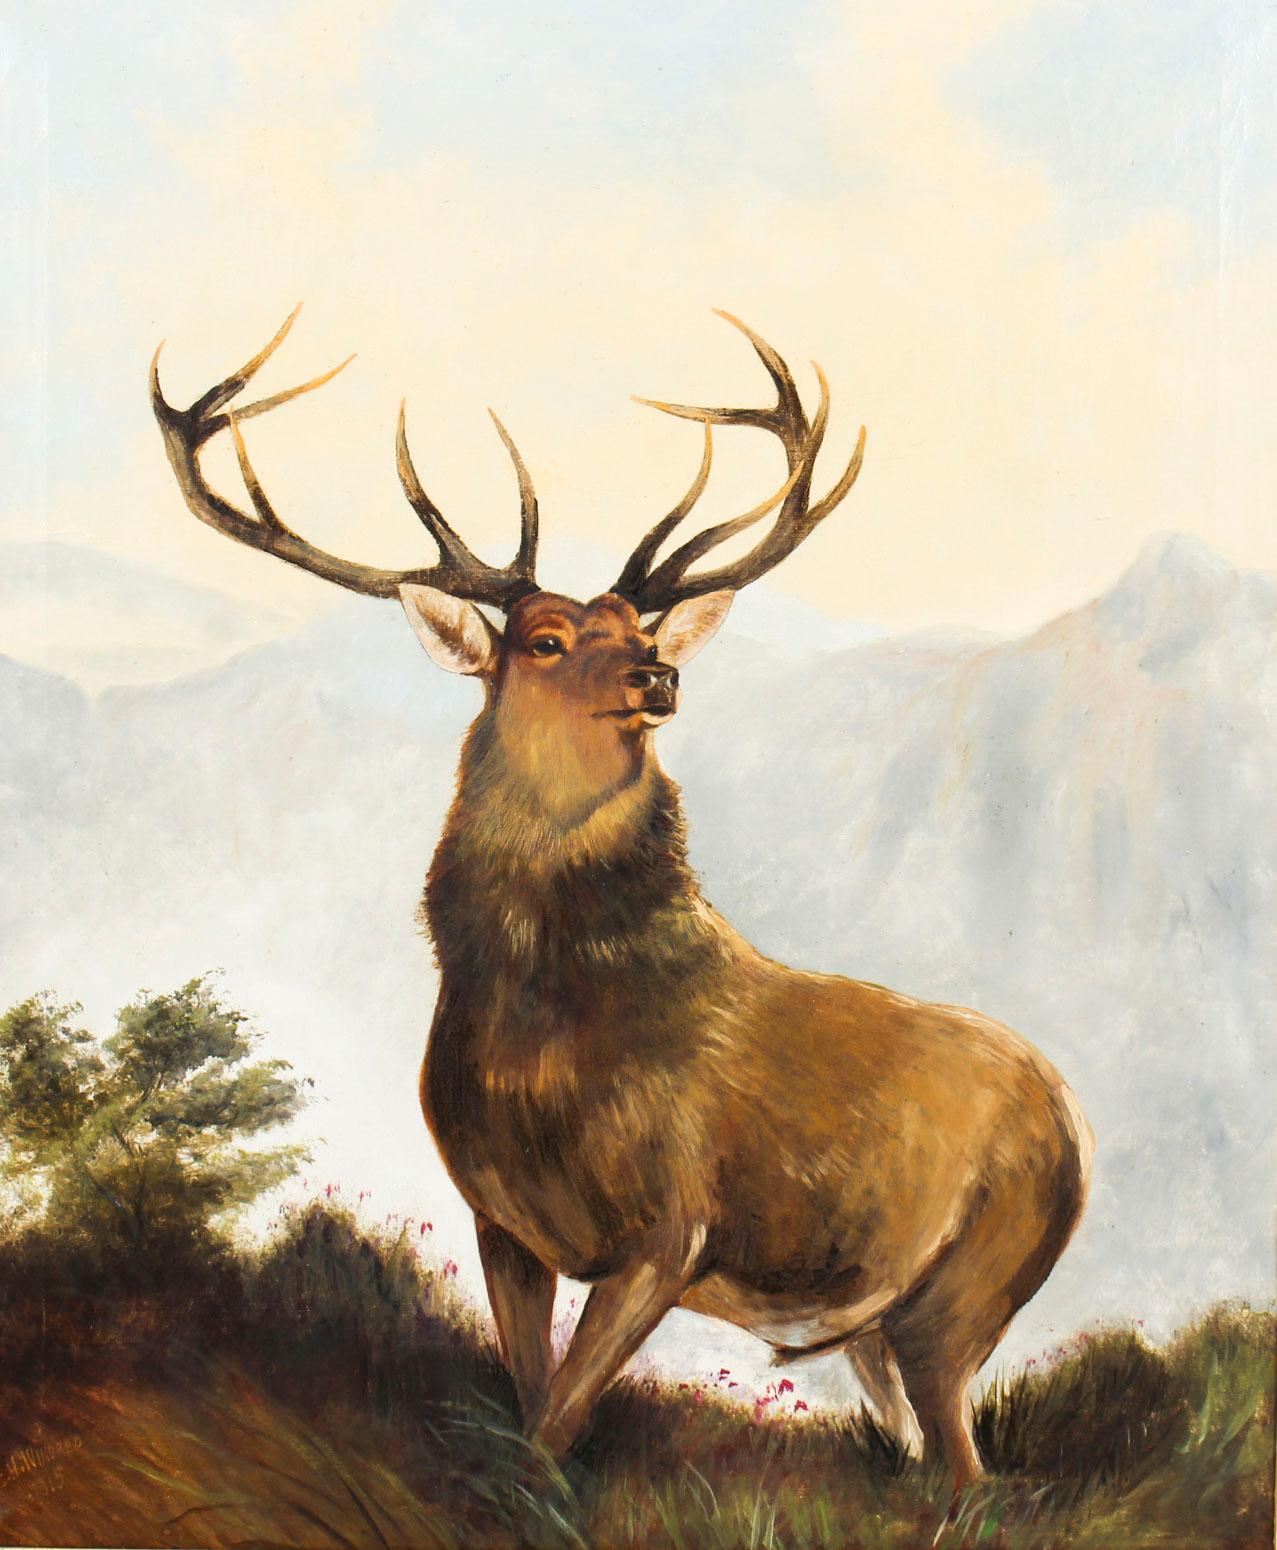 This is a beautiful large antique oil on canvas painting of a stag by Edward Henry Windred (1875-1953), signed and dated 1915, lower left.

The painting features a large red deer at the top of a steep ridge in the Highlands of Scotland.

The